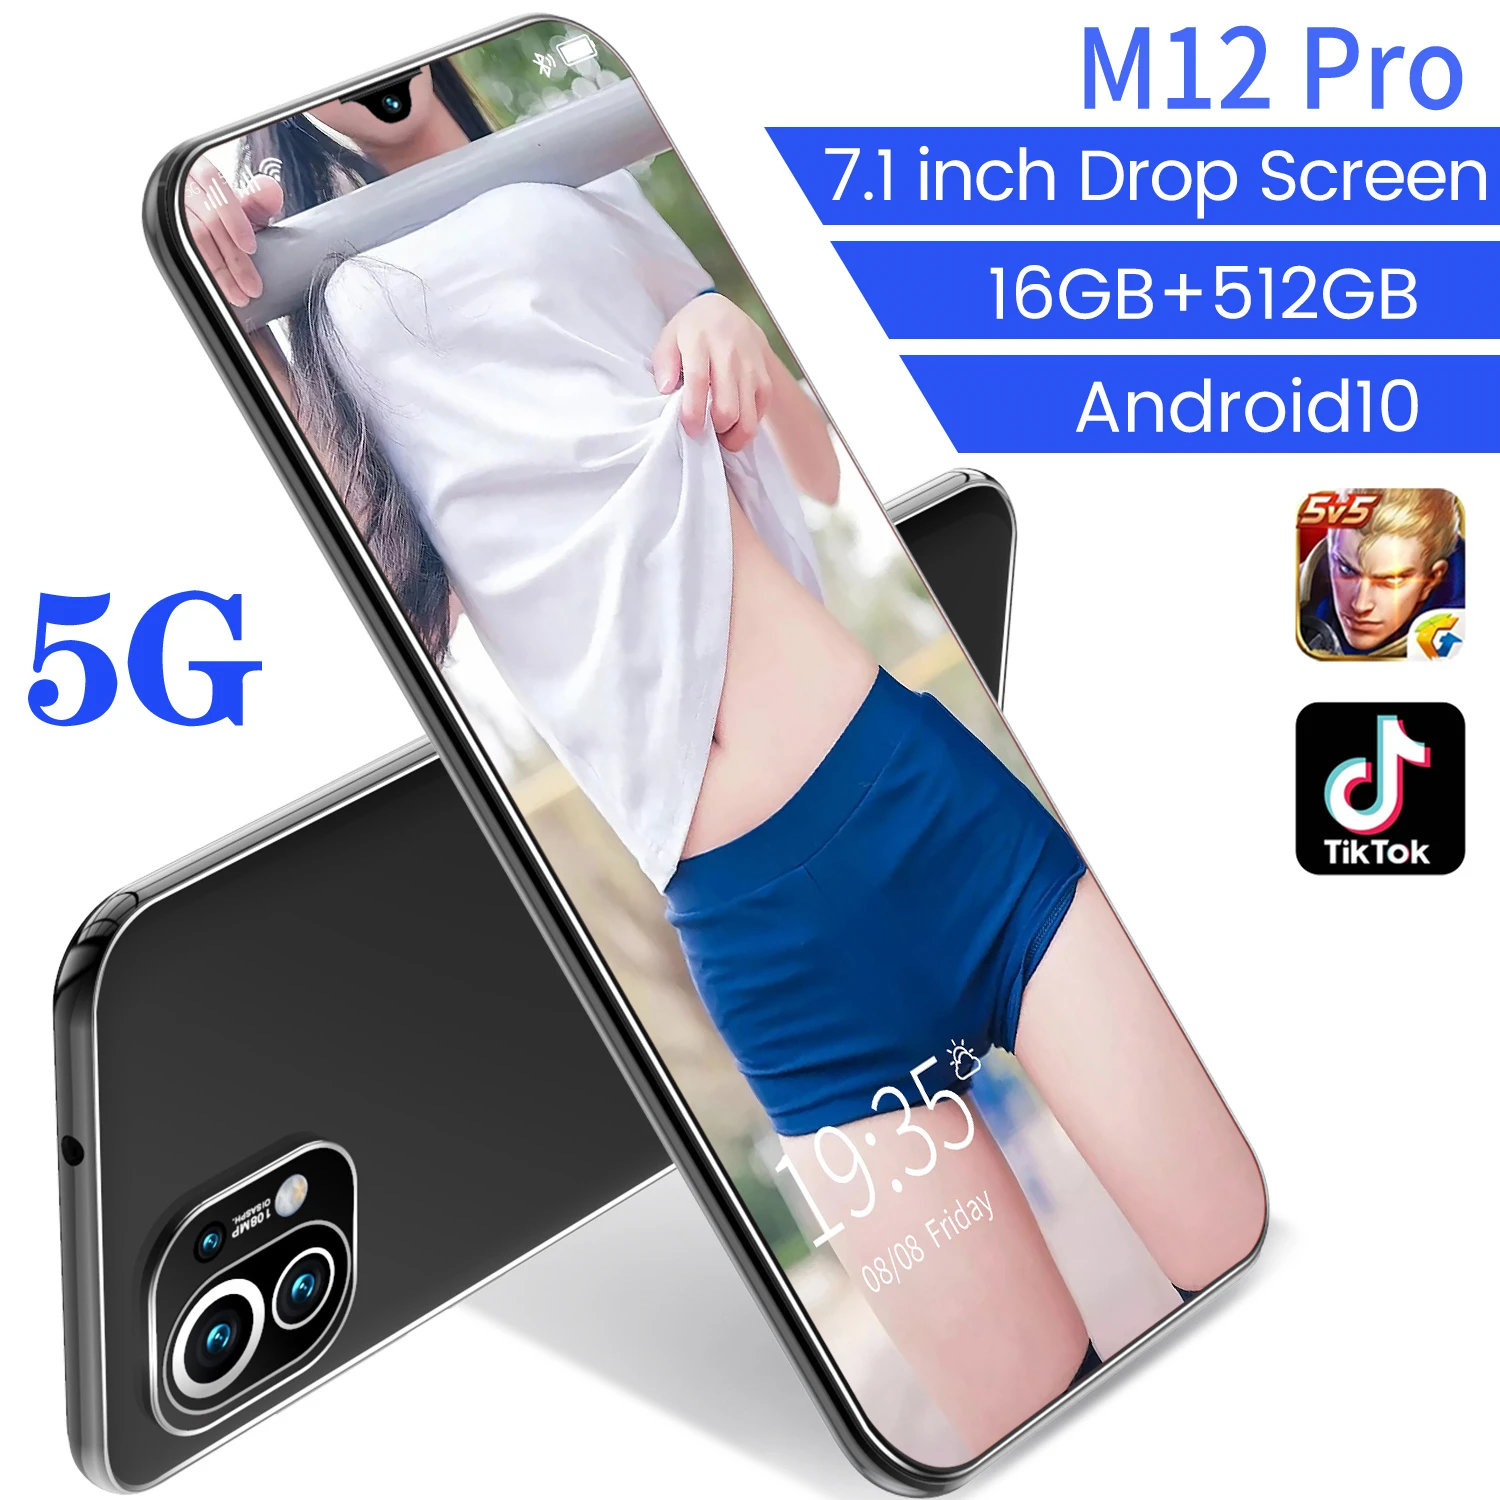 M12 Pro Min Laptop Android 7.1 Inch 16GB 512GB 6800mAh Global Version Dual SIM 5G 10 Core Bluetooth 24MP 48MP Face ID Tablet cheap android tablet